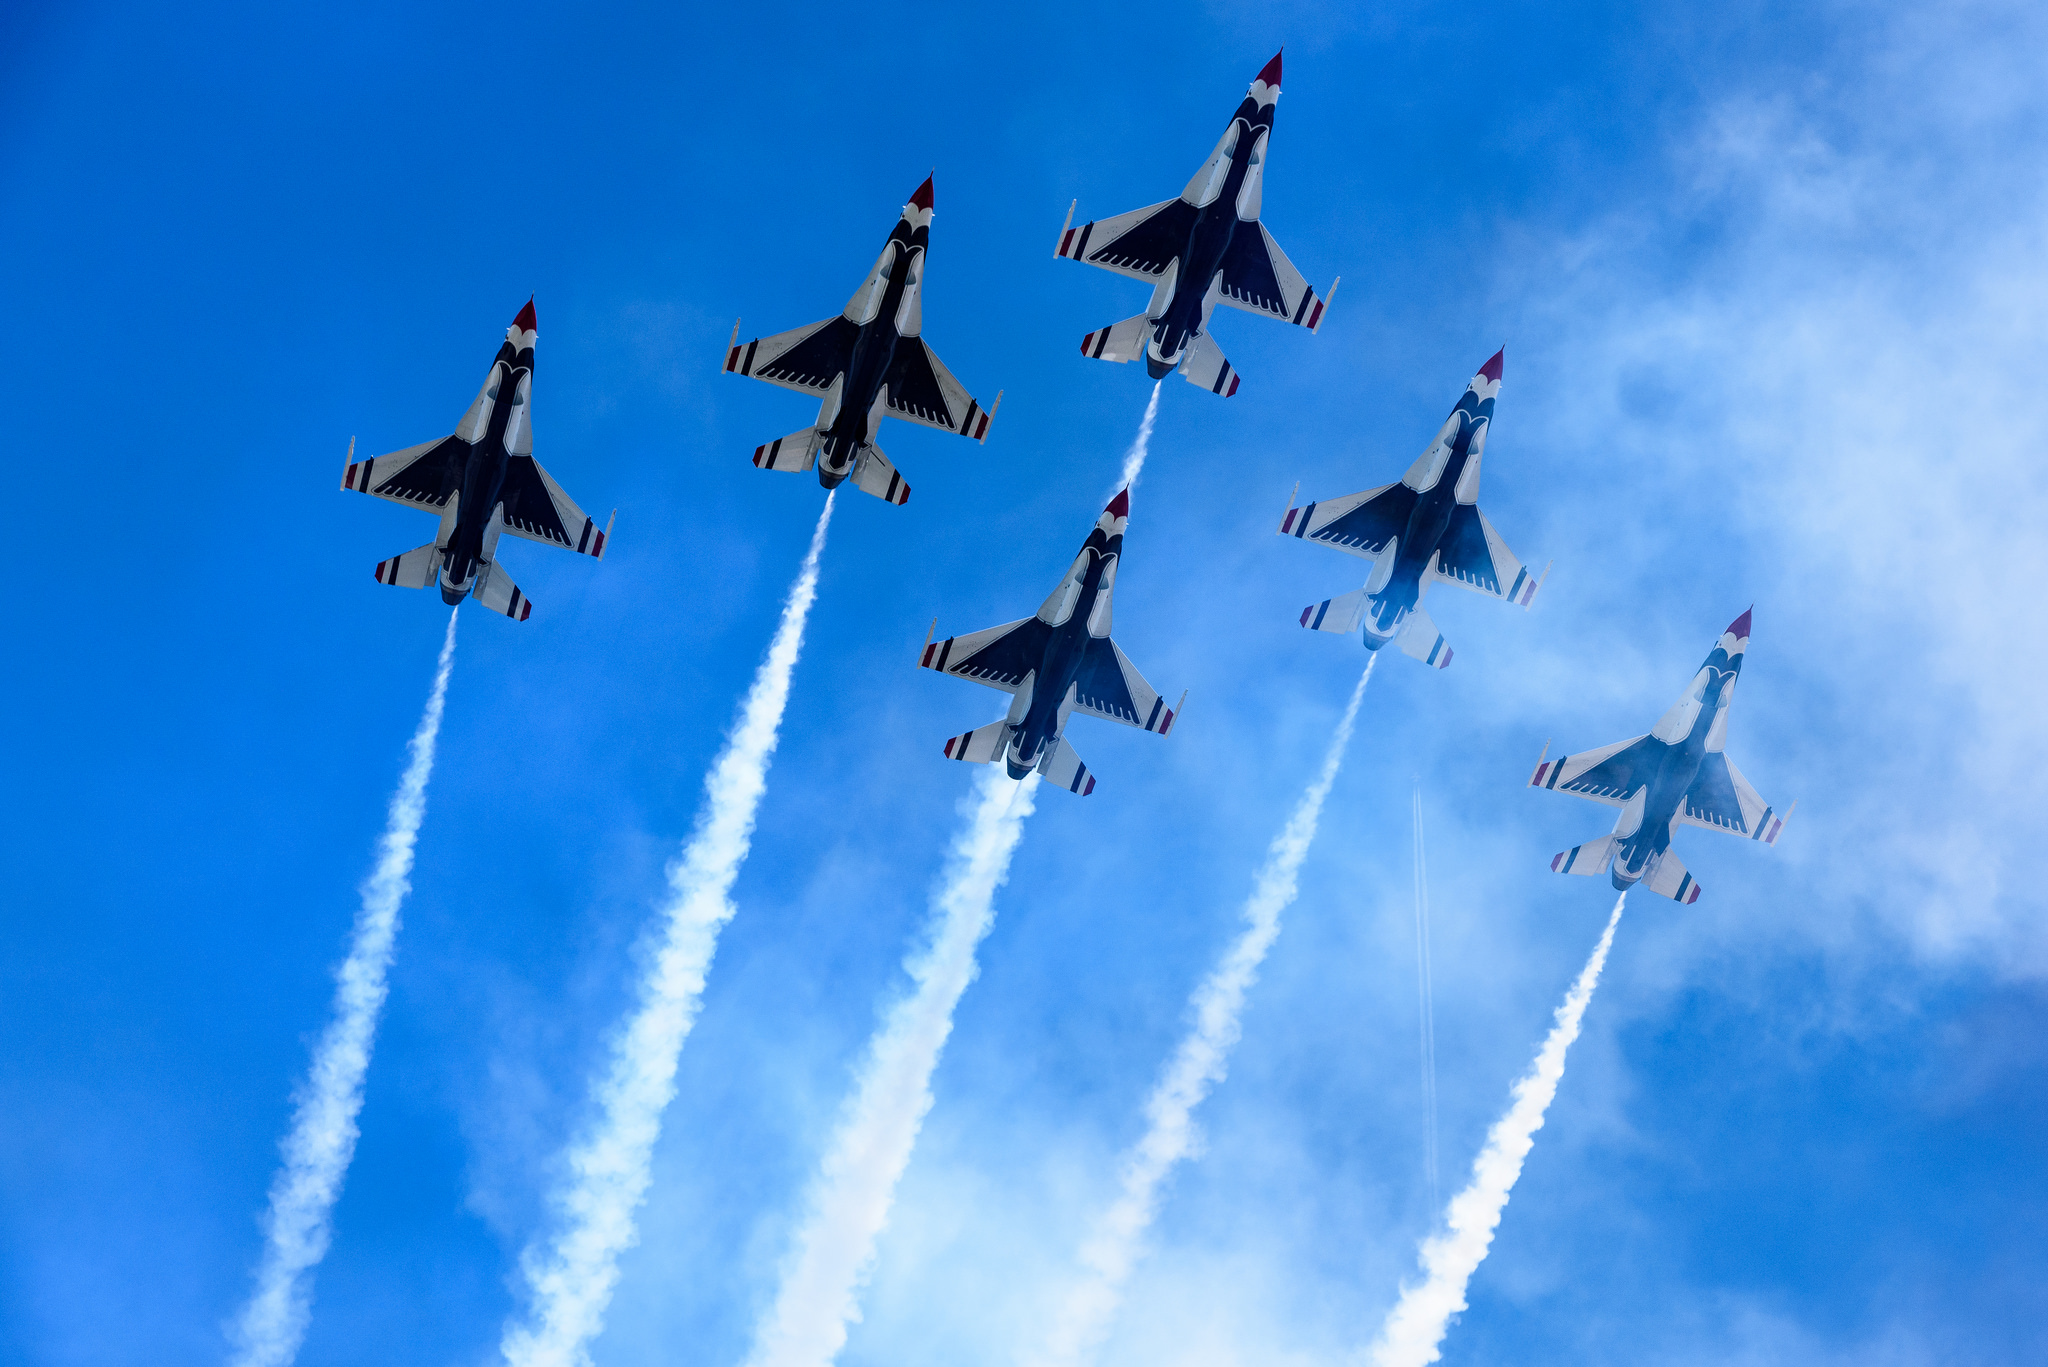 military, air show, air force, aircraft, general dynamics f 16 fighting falcon, jet fighter, smoke, united states air force thunderbirds, military aircraft